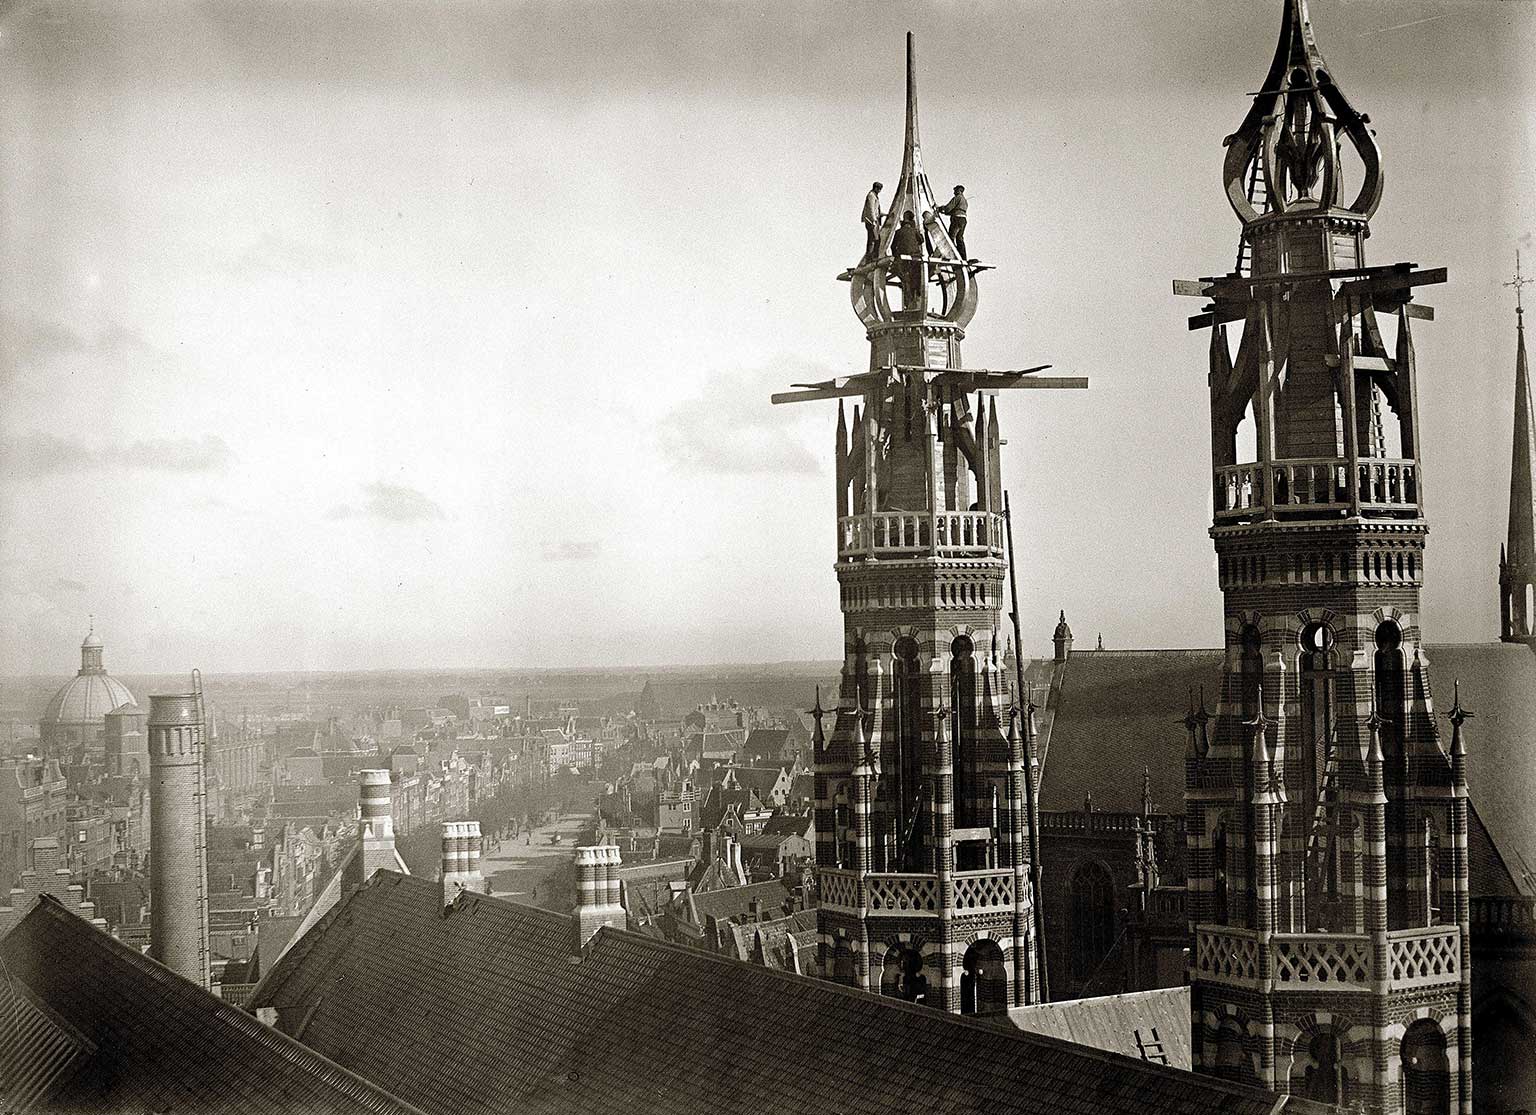 Former Head Post Office, Amsterdam, during the build of the towers in 1897